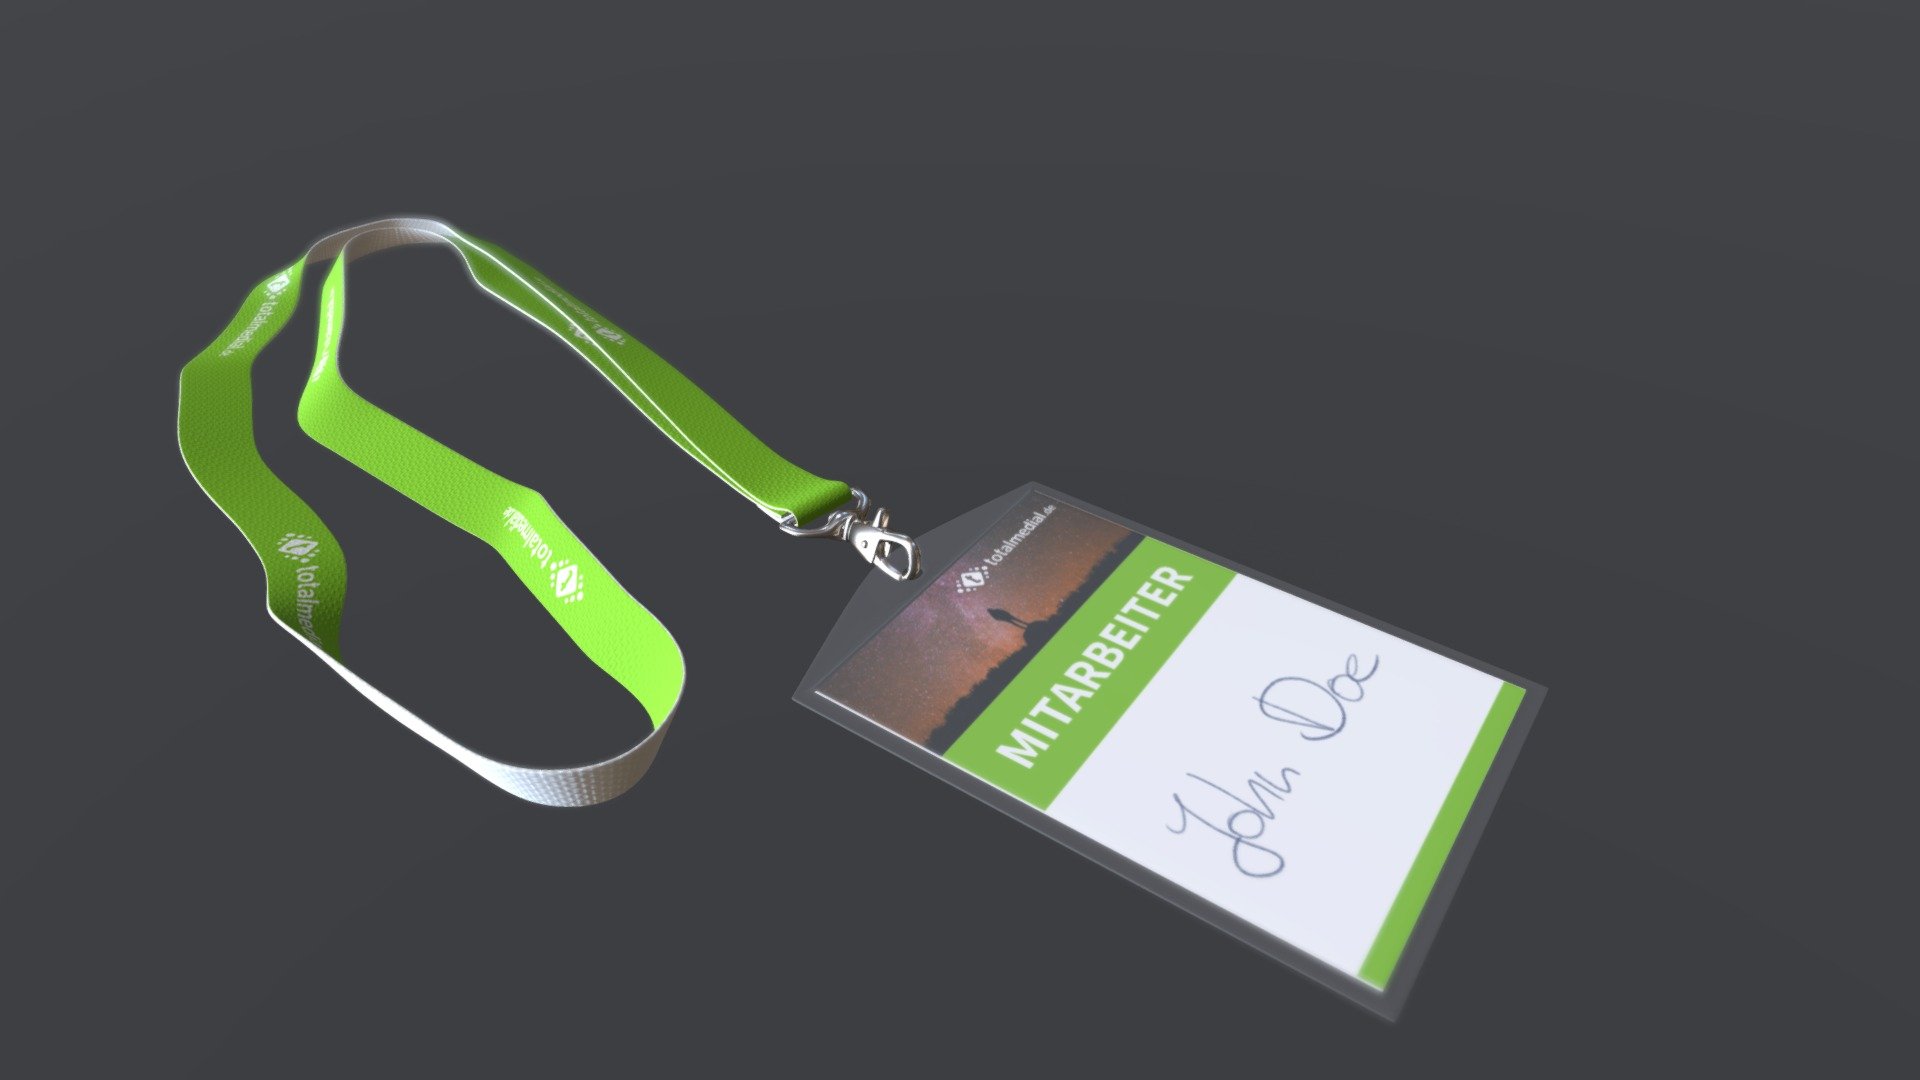 I created a mockup for a lanyard with id-card. My main focus was on a simple reusable texture - so i can change the texture simply based on the PDF i created for the production 3d model